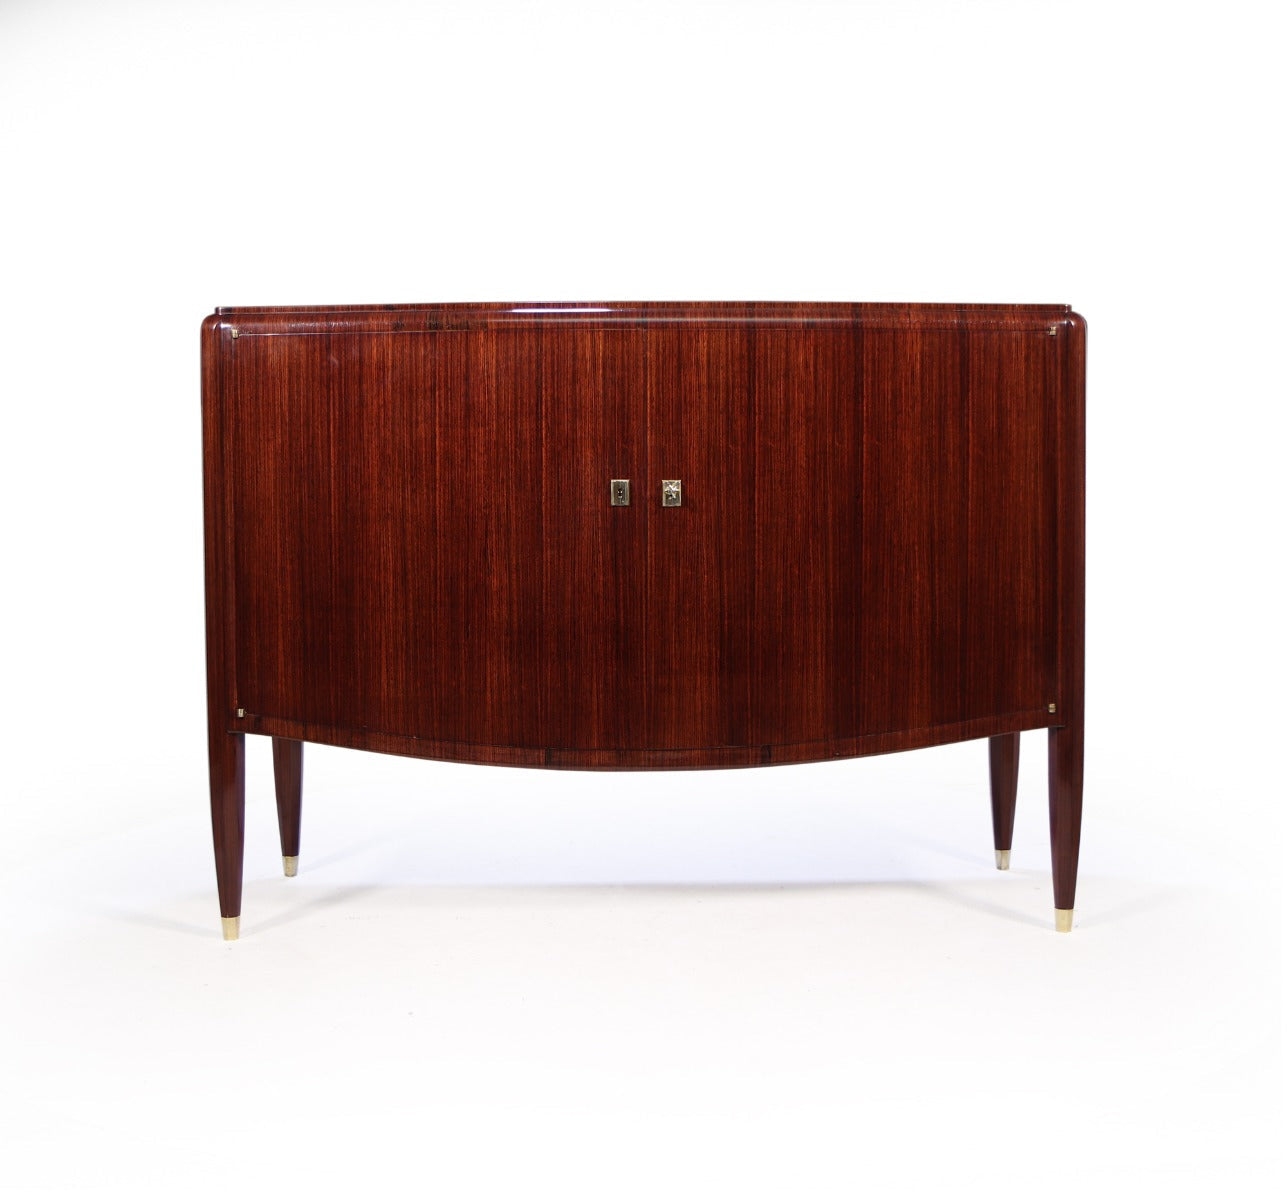 French Art Deco Sideboard by Jules Leleu c1925 – The Furniture Rooms